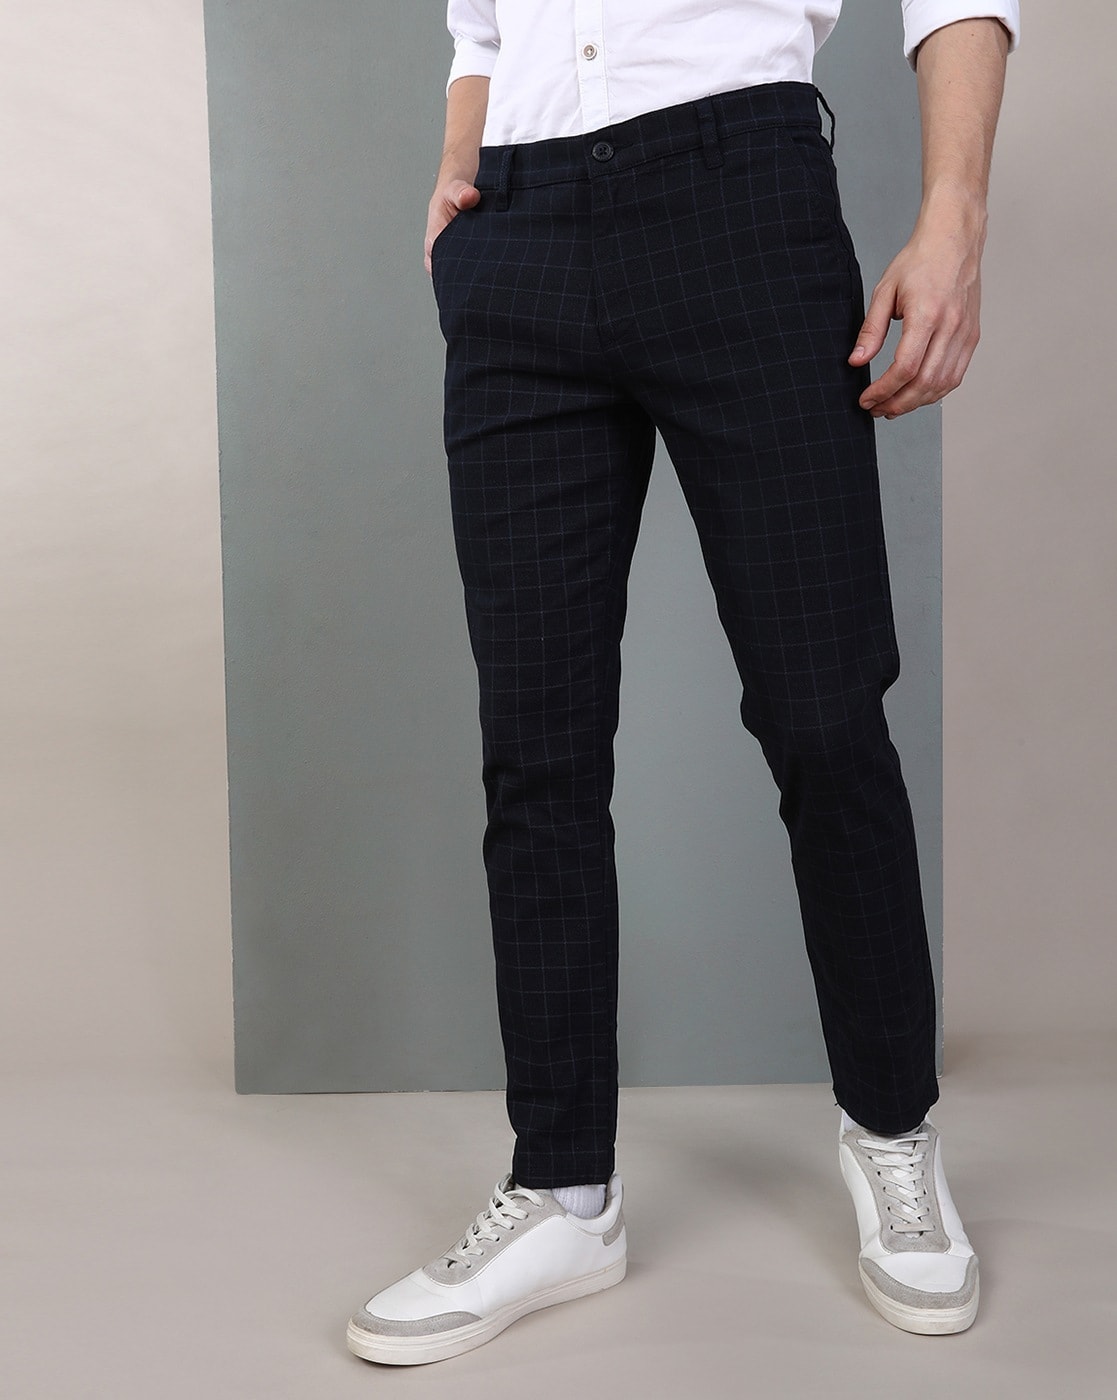 Buy Navy Blue Trousers & Pants for Men by The Indian Garage Co